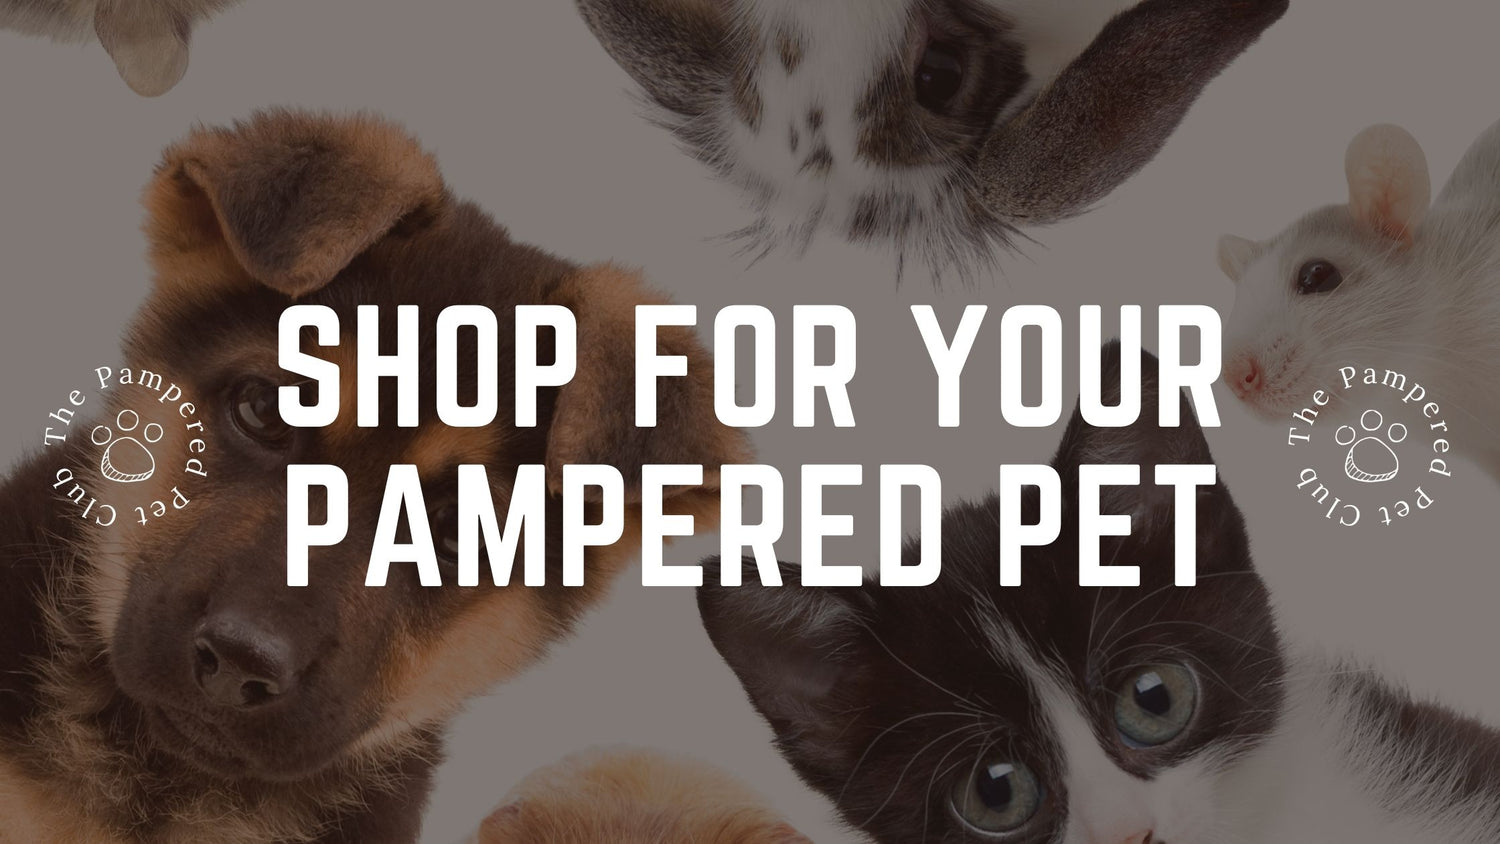 Shop for your pampered pets at The Pampered Pet Club